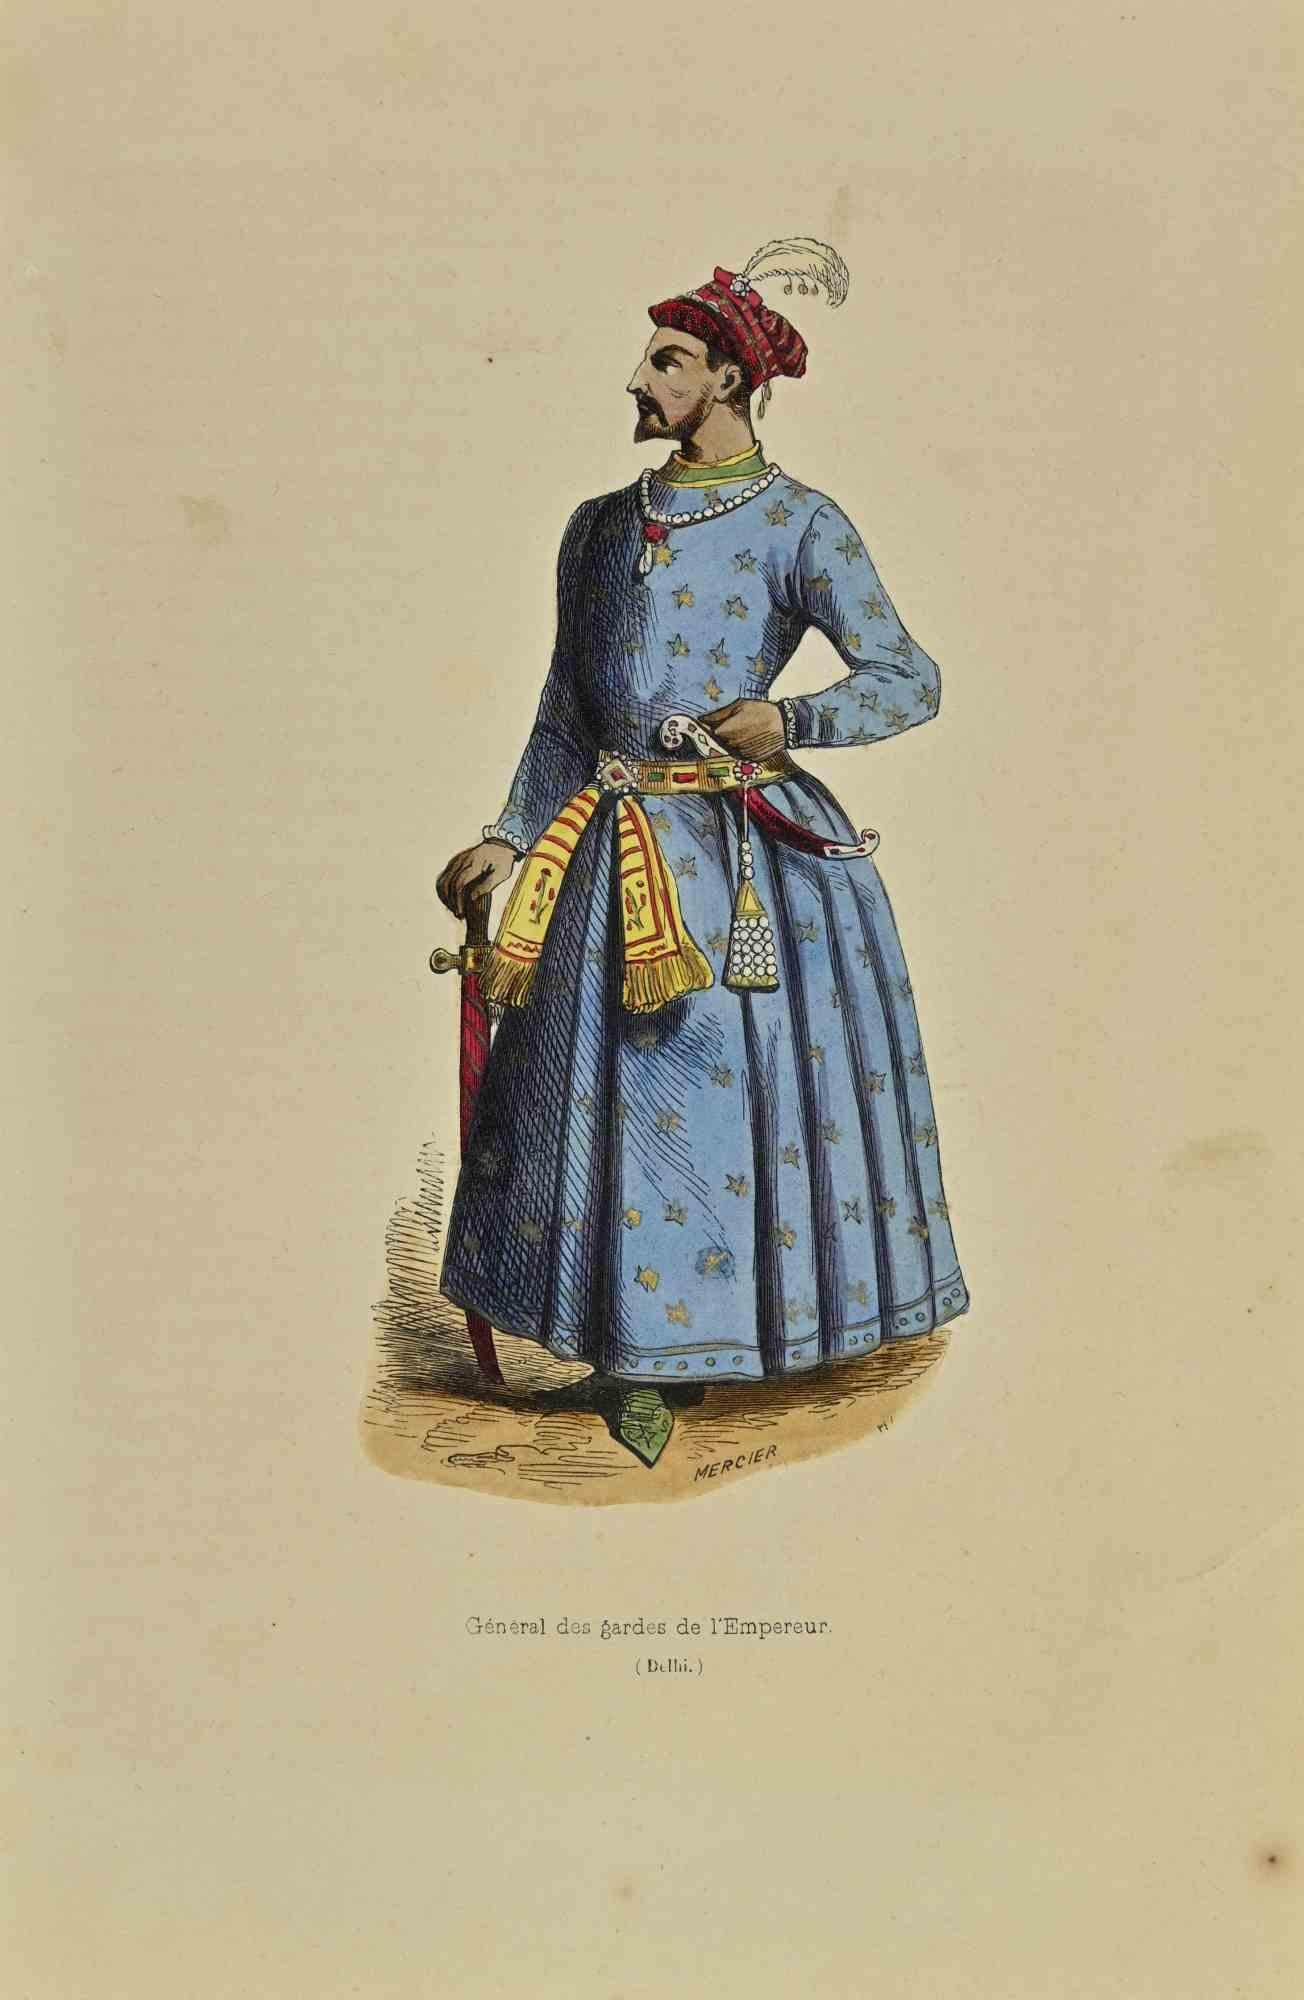 General of the Emperor’s Guards is a lithograph made by Auguste Wahlen in 1844.

Hand colored.

Good condition.

At the center of the artwork is the original title "General des gardes de l'Empereur".

The work is part of Suite Moeurs, usages et